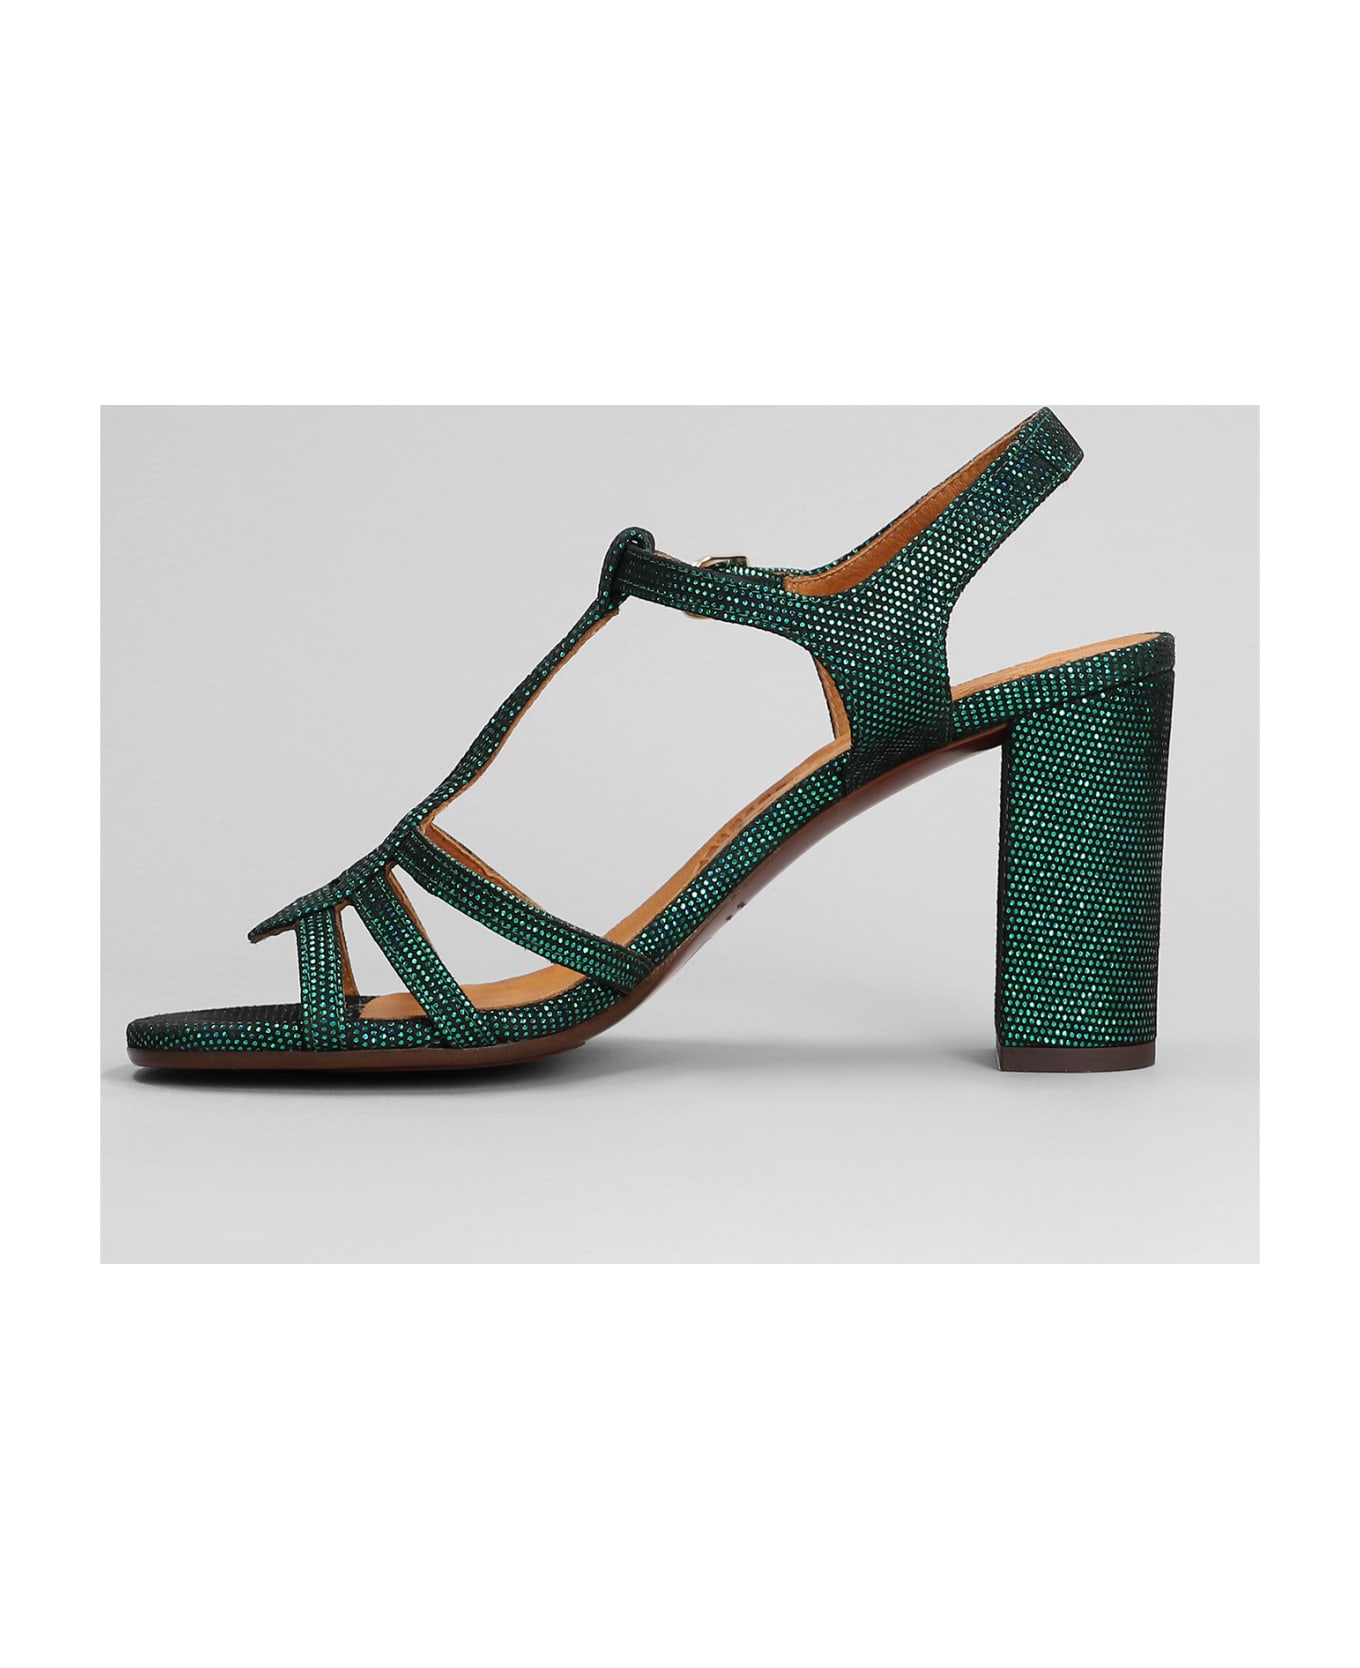 Chie Mihara Babi 44 Sandals In Green Leather - green サンダル